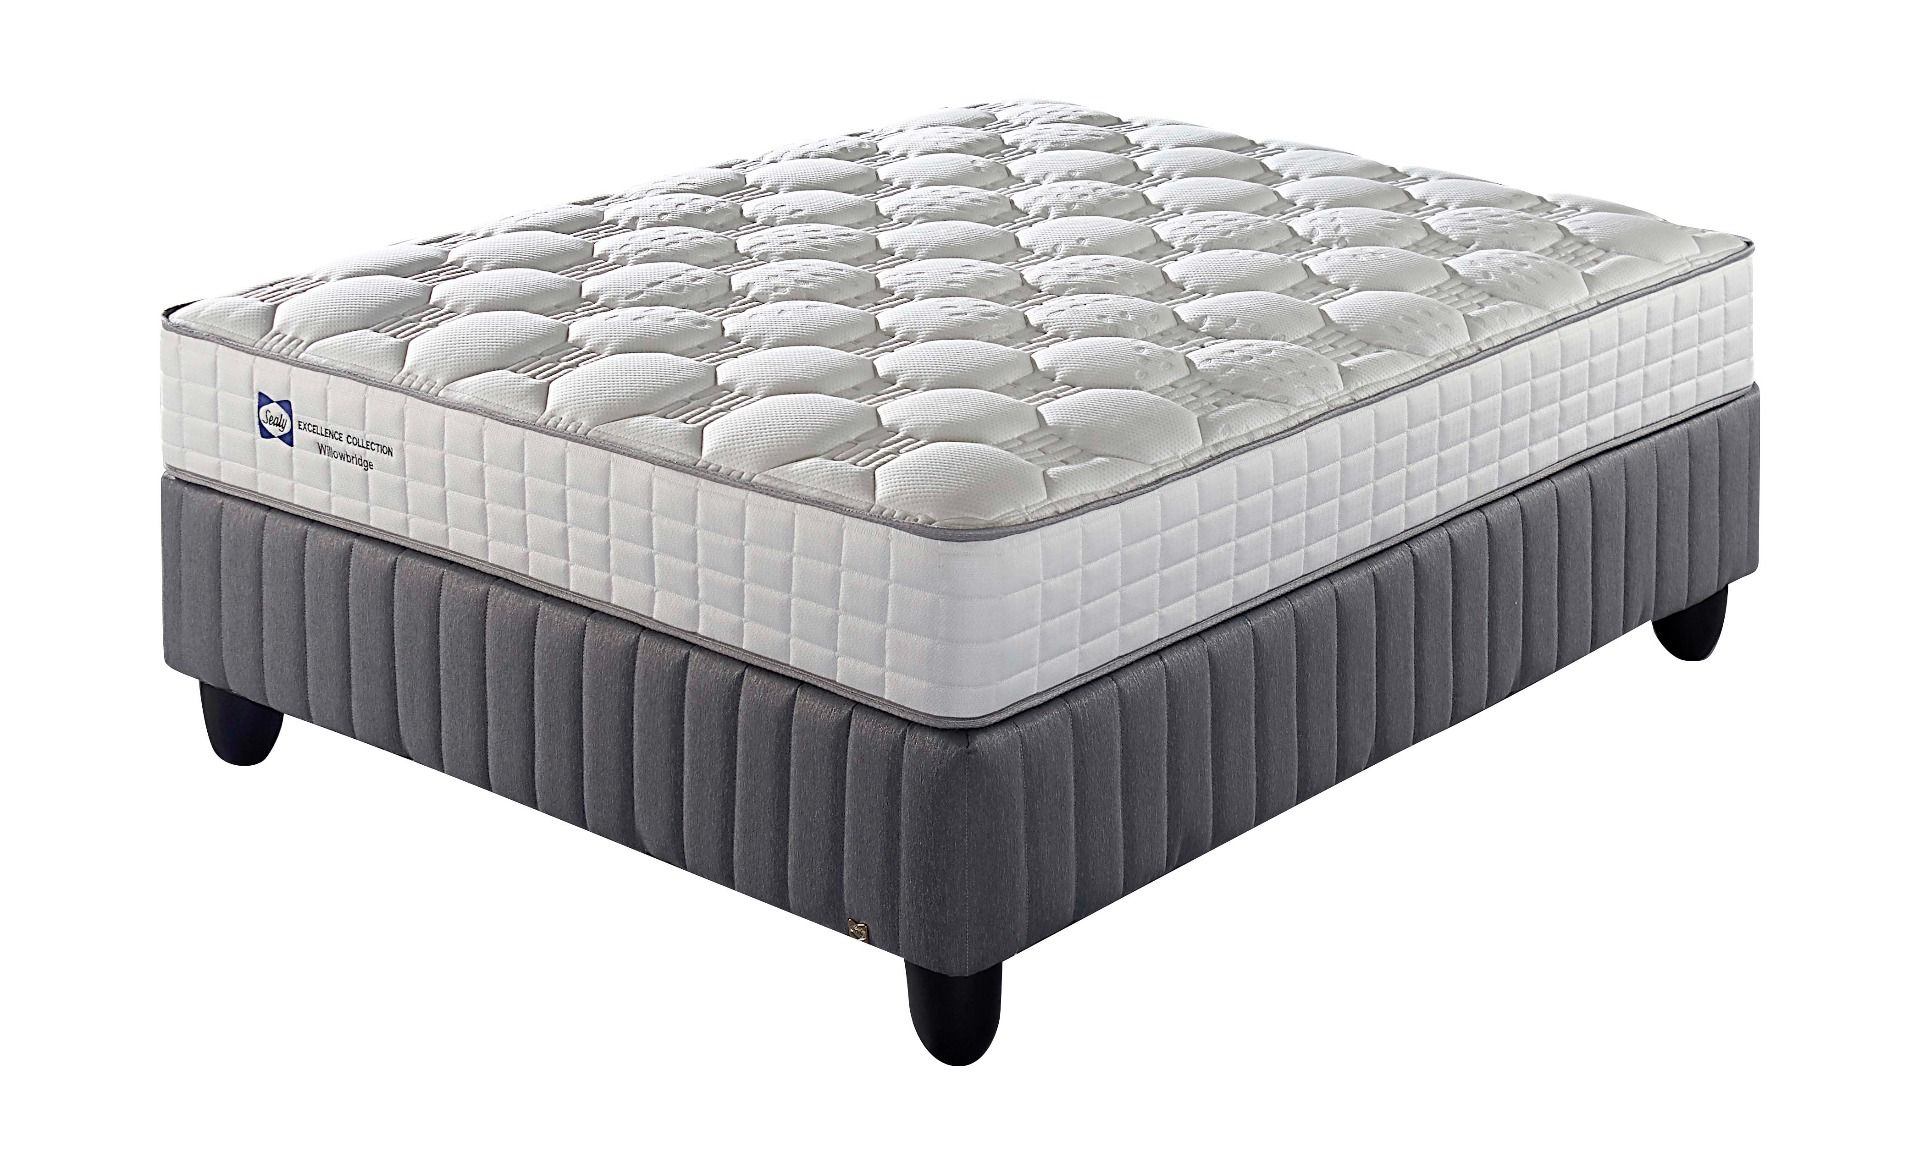 Sealy Willowbridge Firm Dial A Bed, Sealy King Bed Dimensions